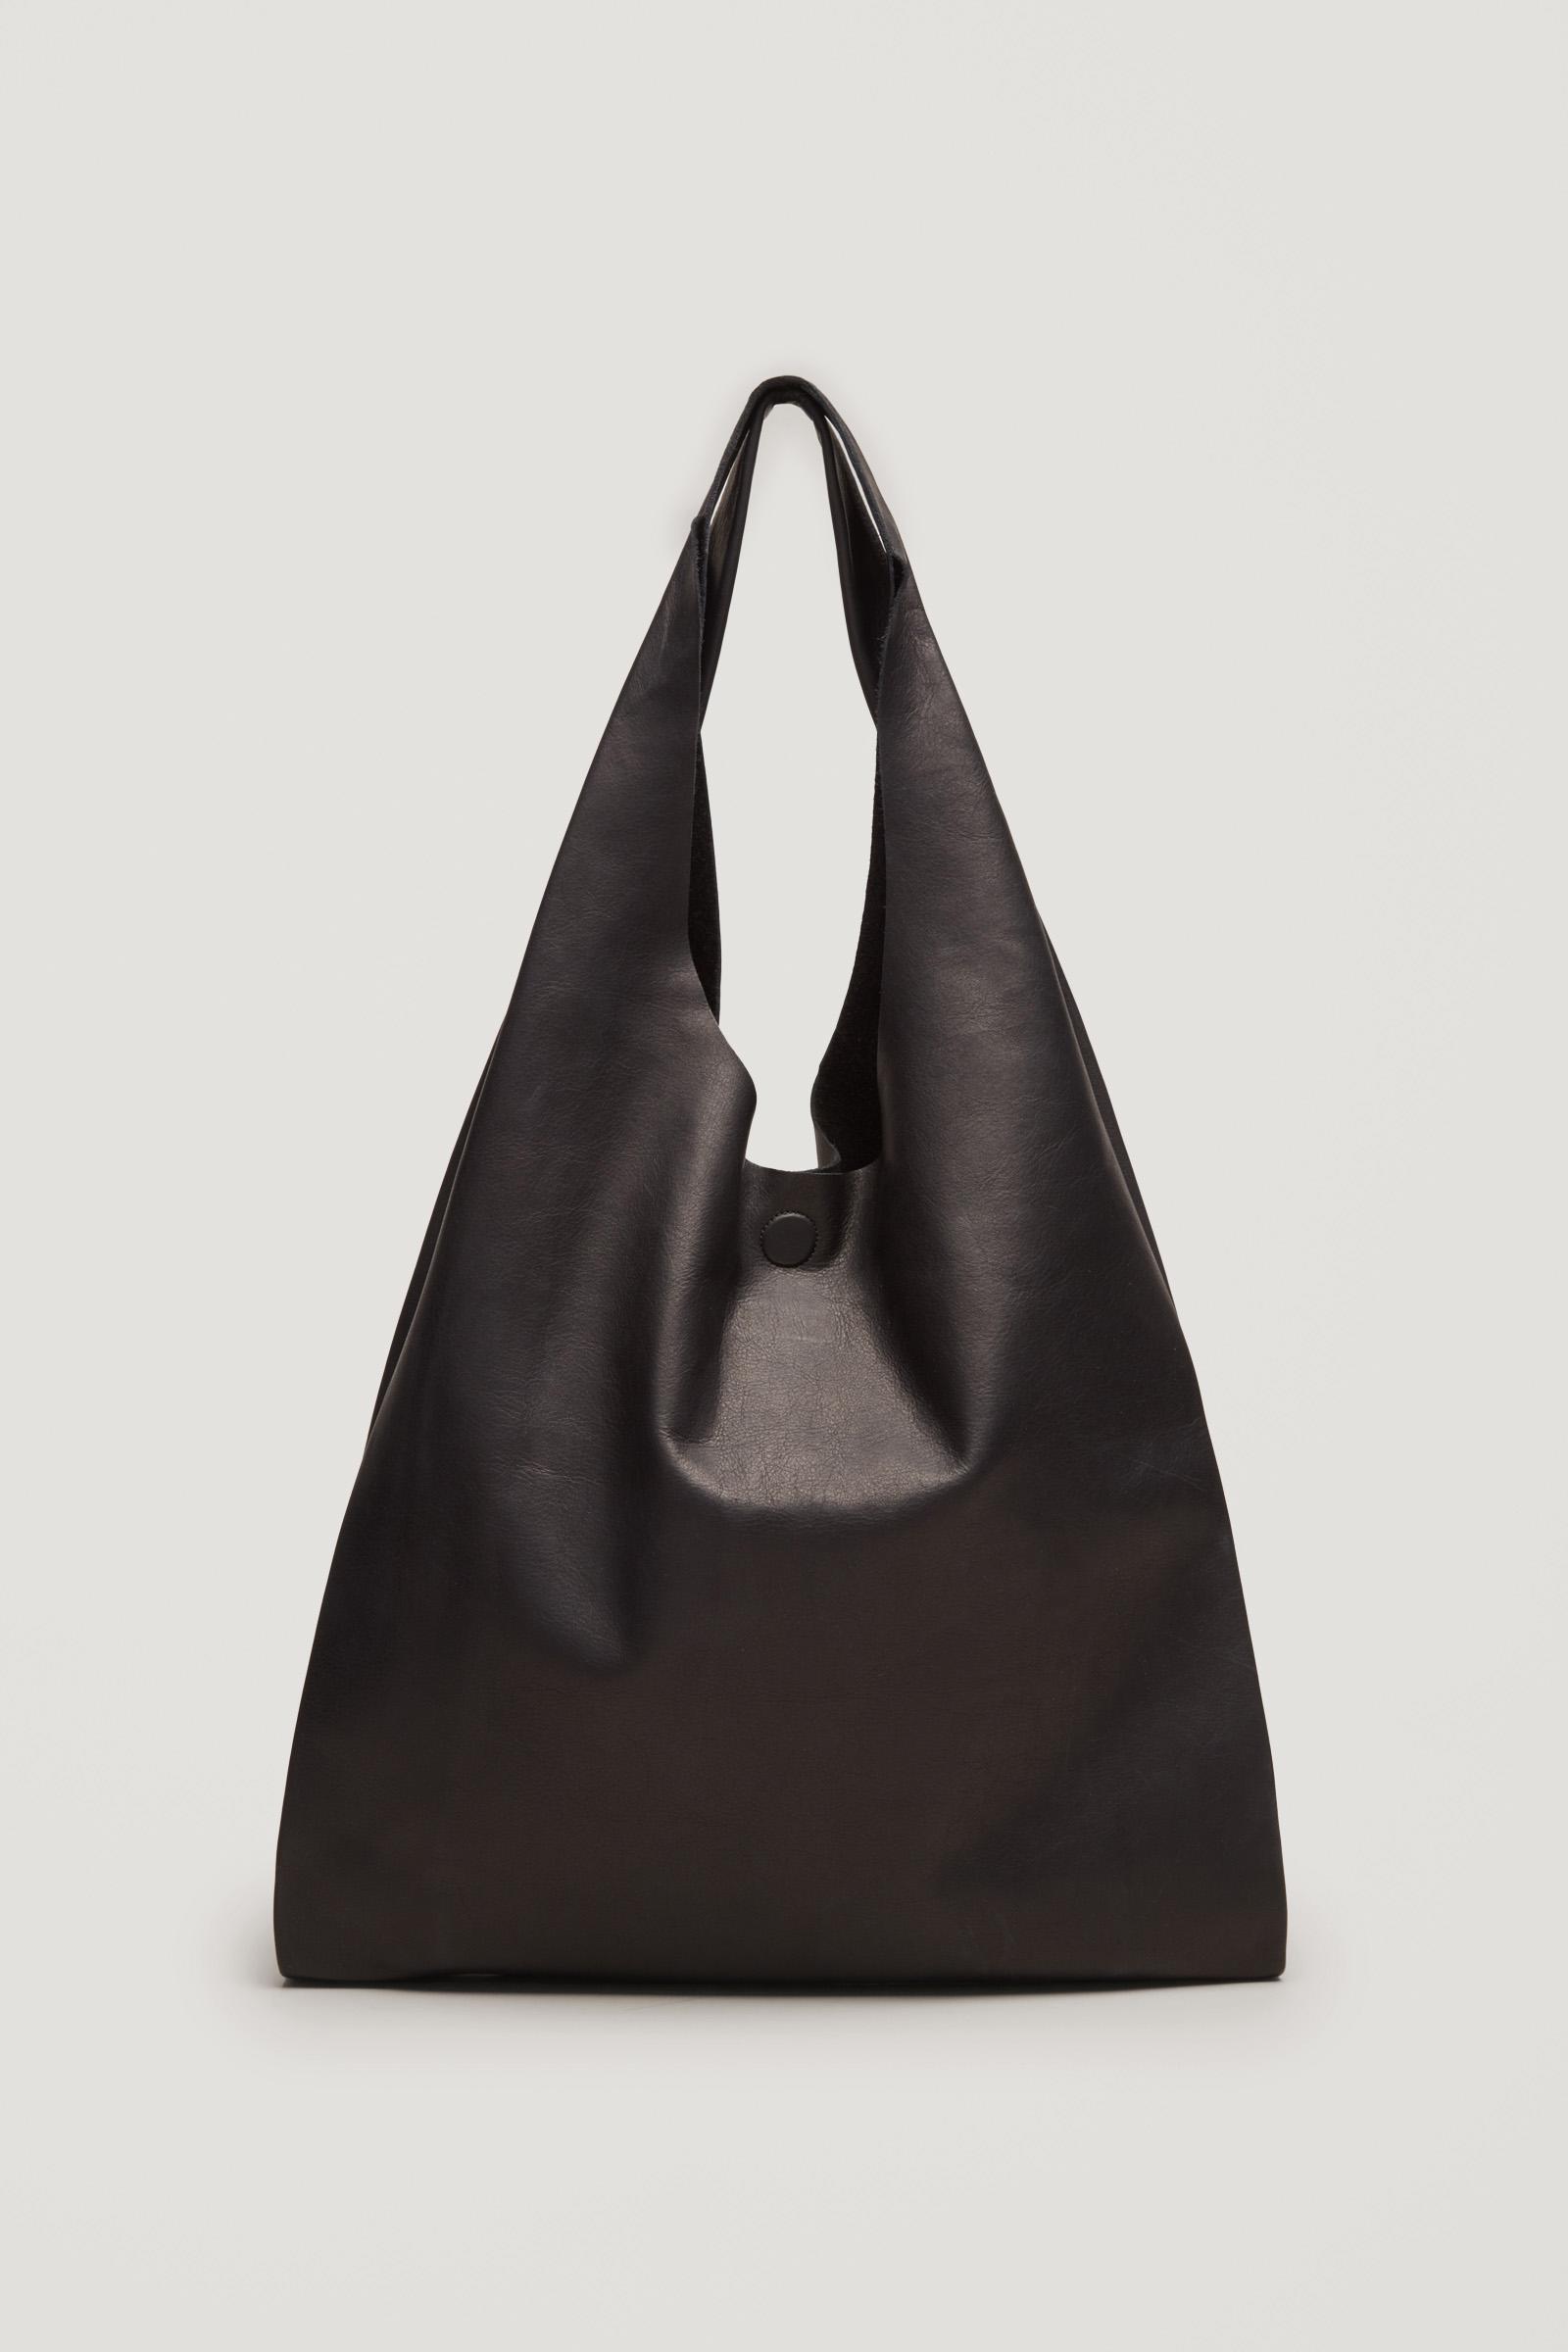 COS Soft Leather Shopper in Black - Lyst